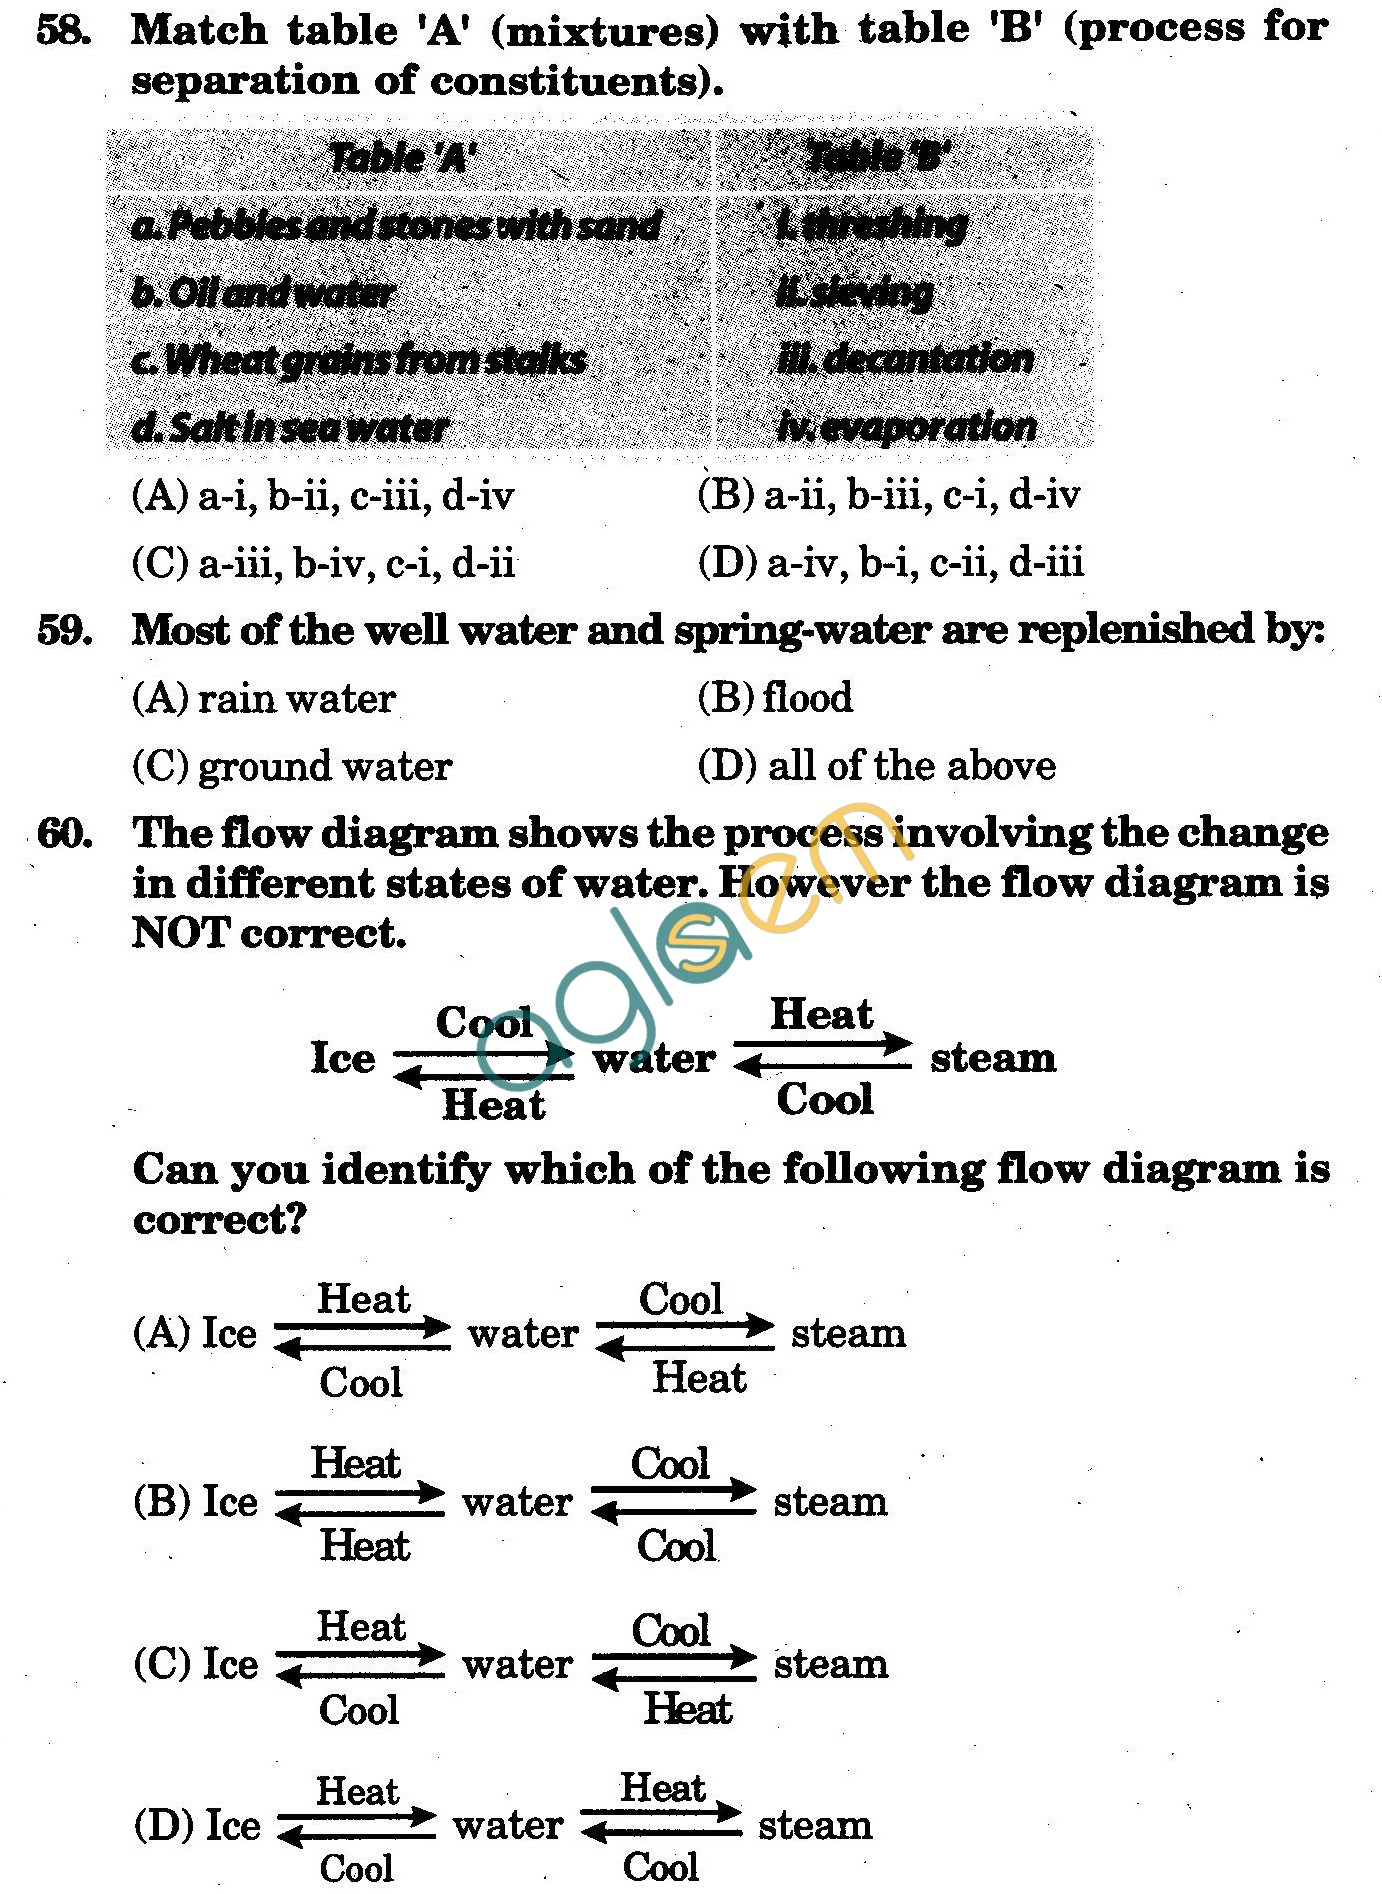 NSTSE 2009 Class VI Question Paper with Answers - Chemistry